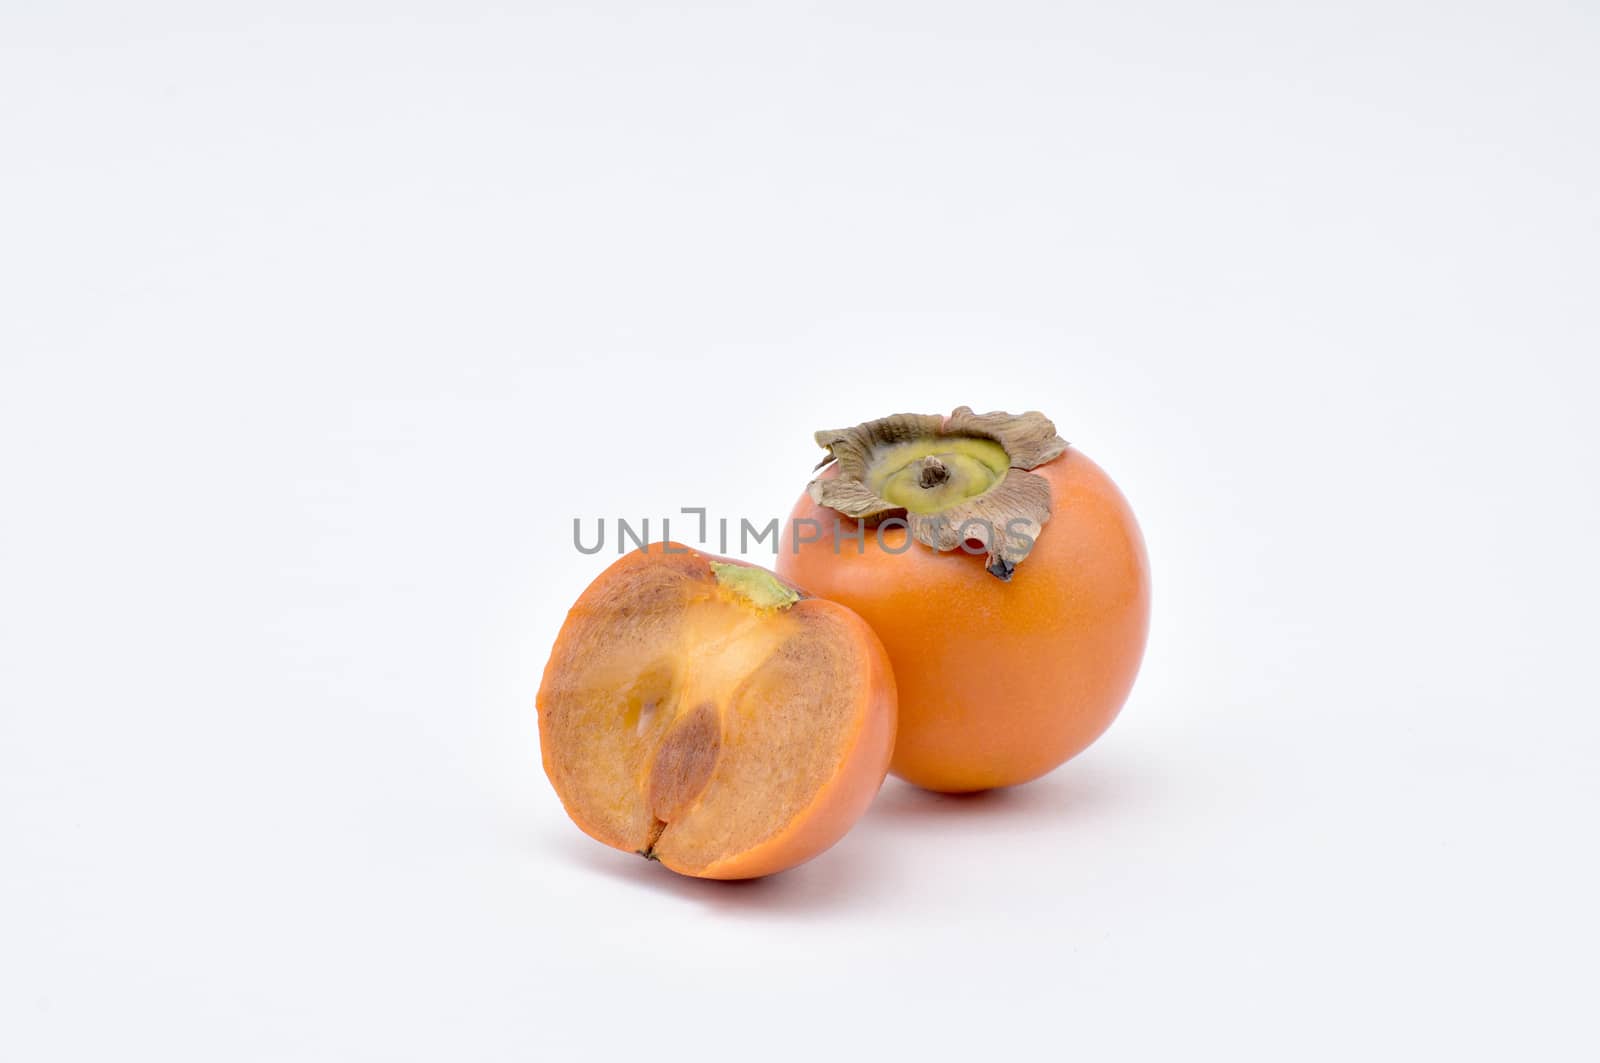 Persimmon,southern fruit of orange-red color,sweet and astringent to taste.